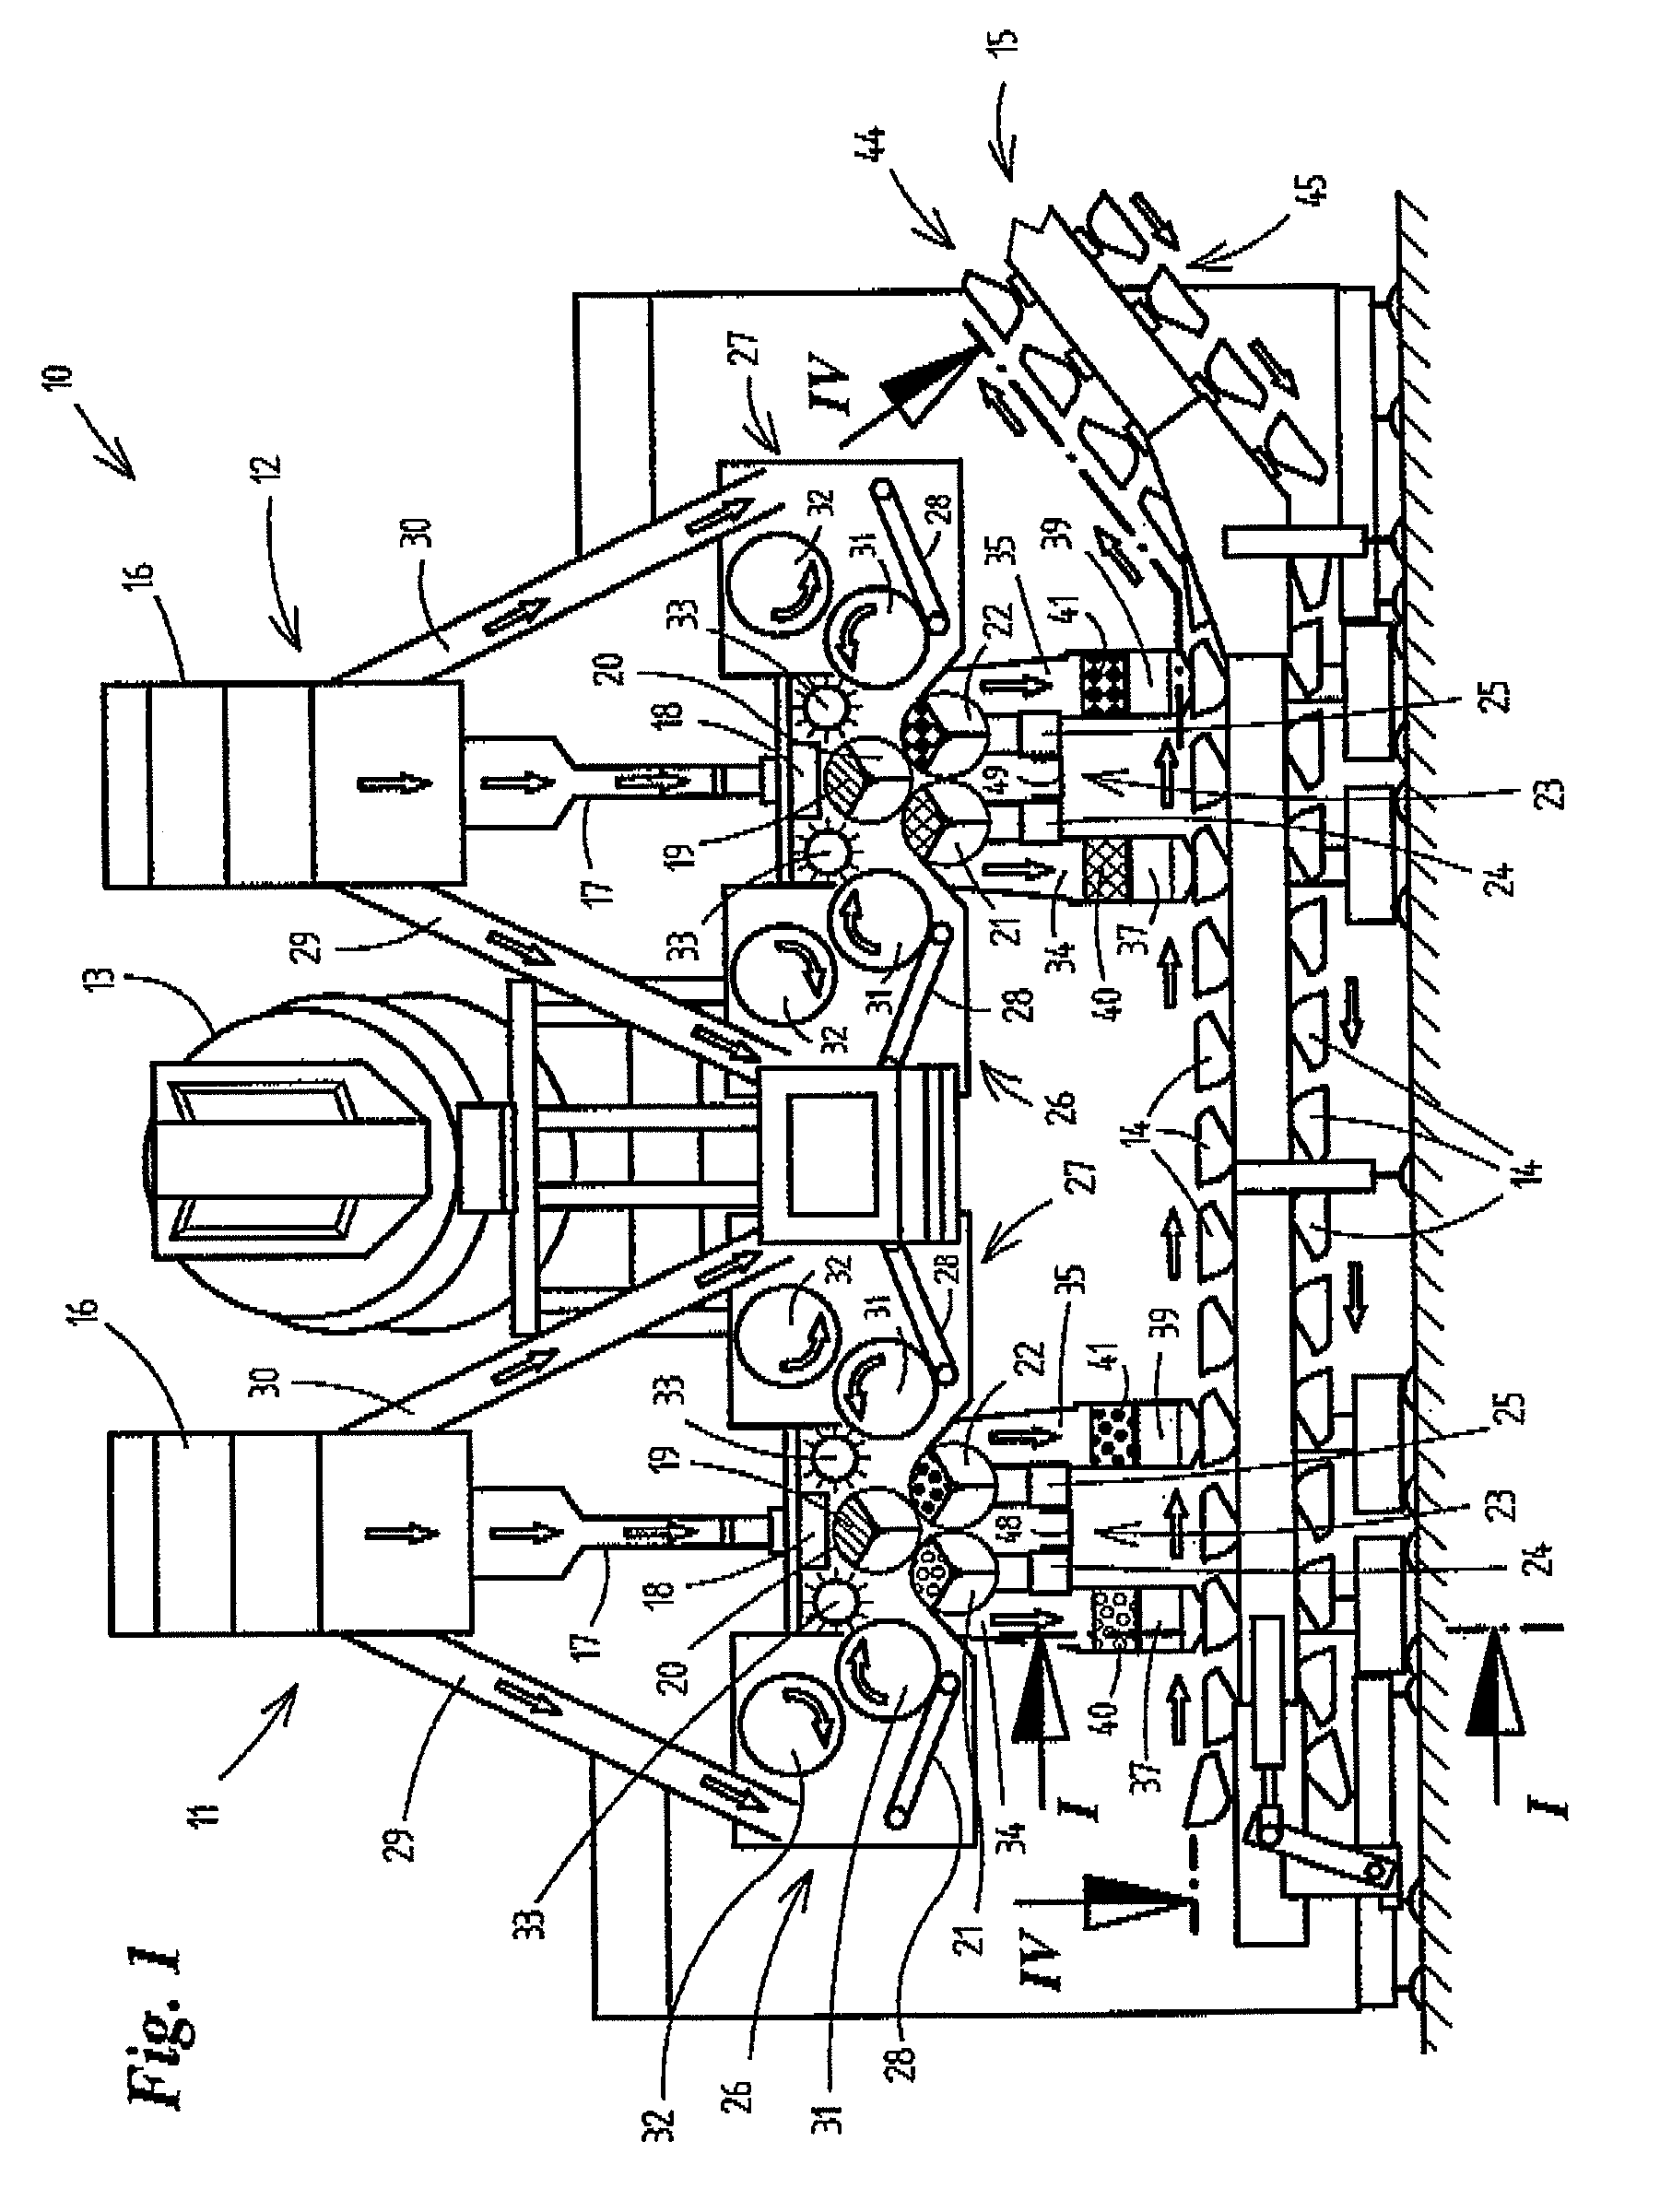 Method of, and apparatus for, forming portions of fibrous material and removing the same